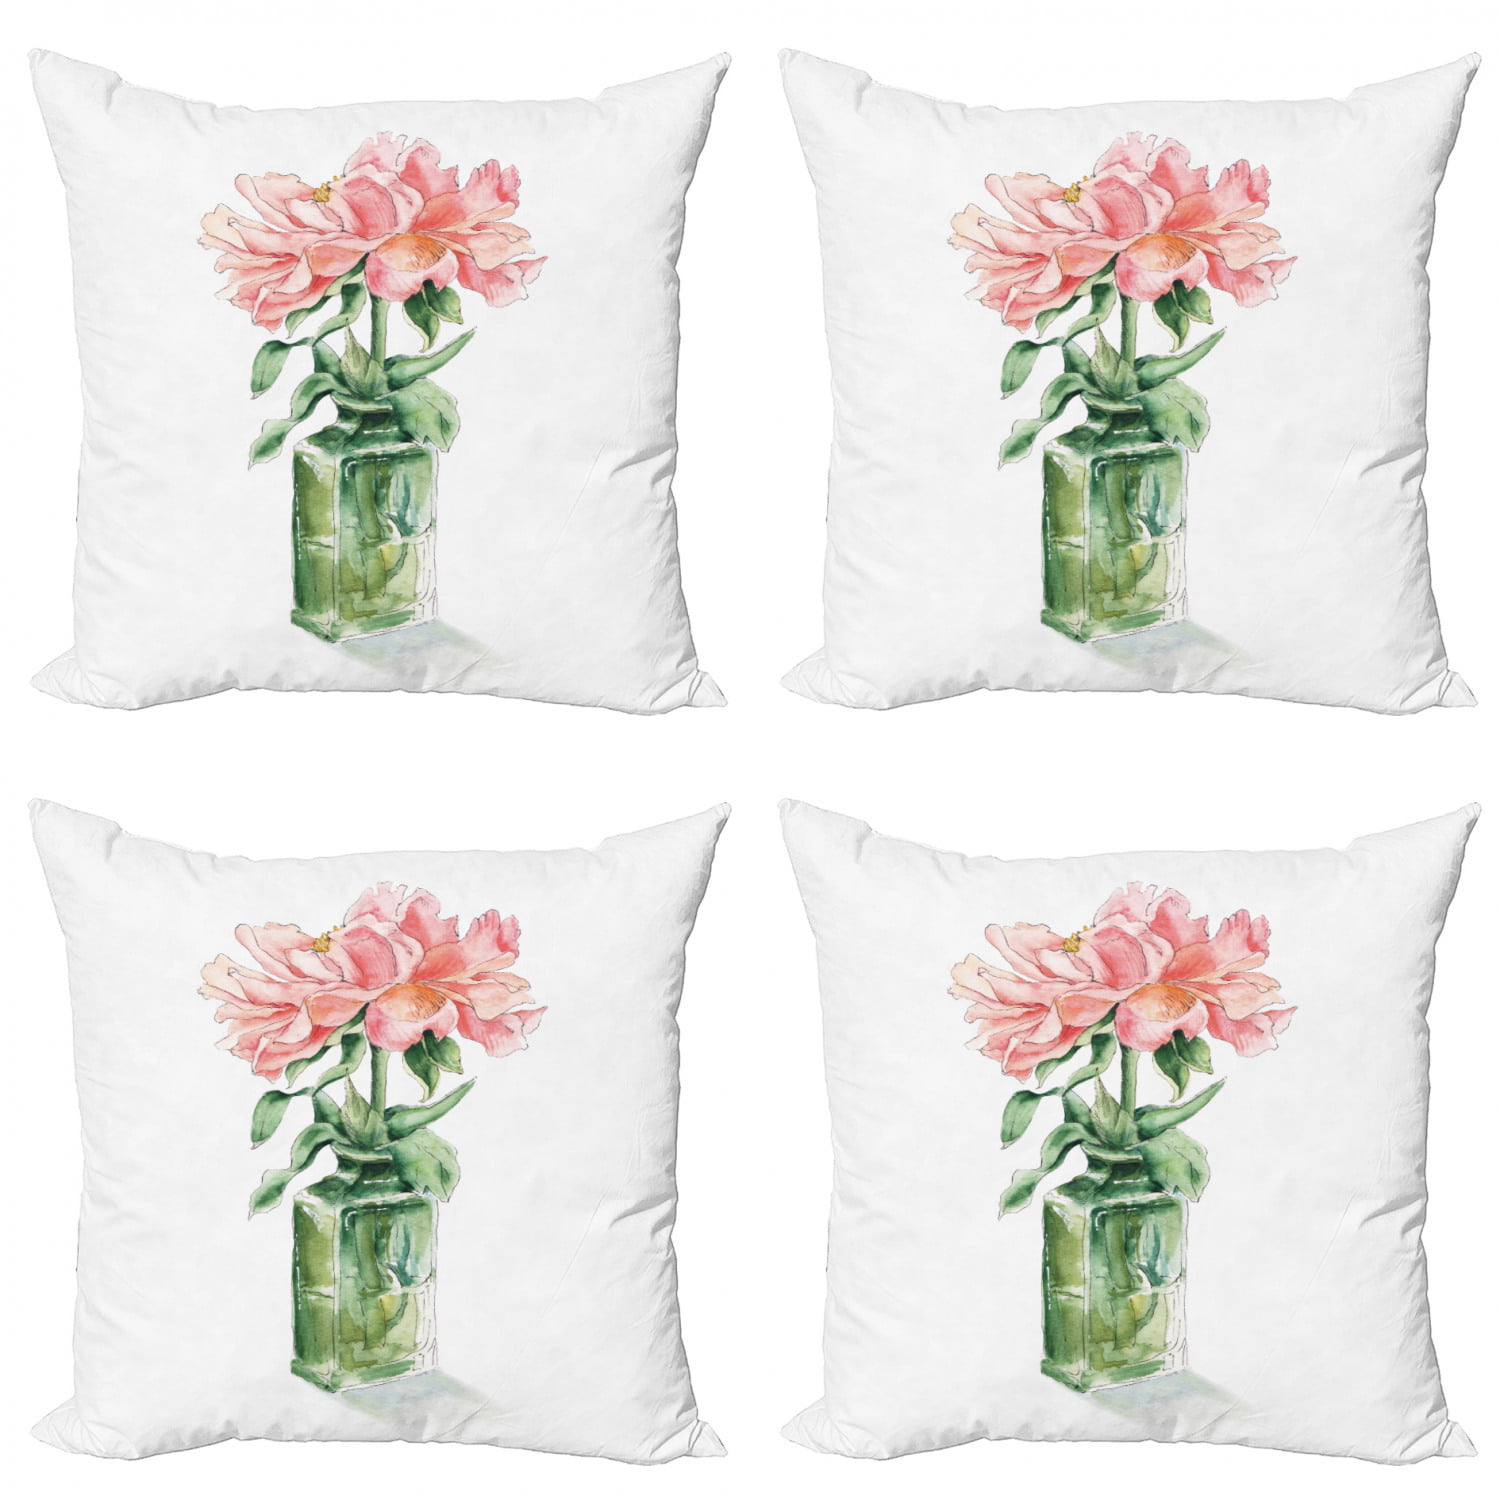 16 Cushion Cover for Couch Living Room Car Baby Blue and Lime Green Bouquets of Blooming Rose Flowers Leaves and Buds Spring Season Ambesonne Summer Pink Decorative Throw Pillow Case Pack of 4 